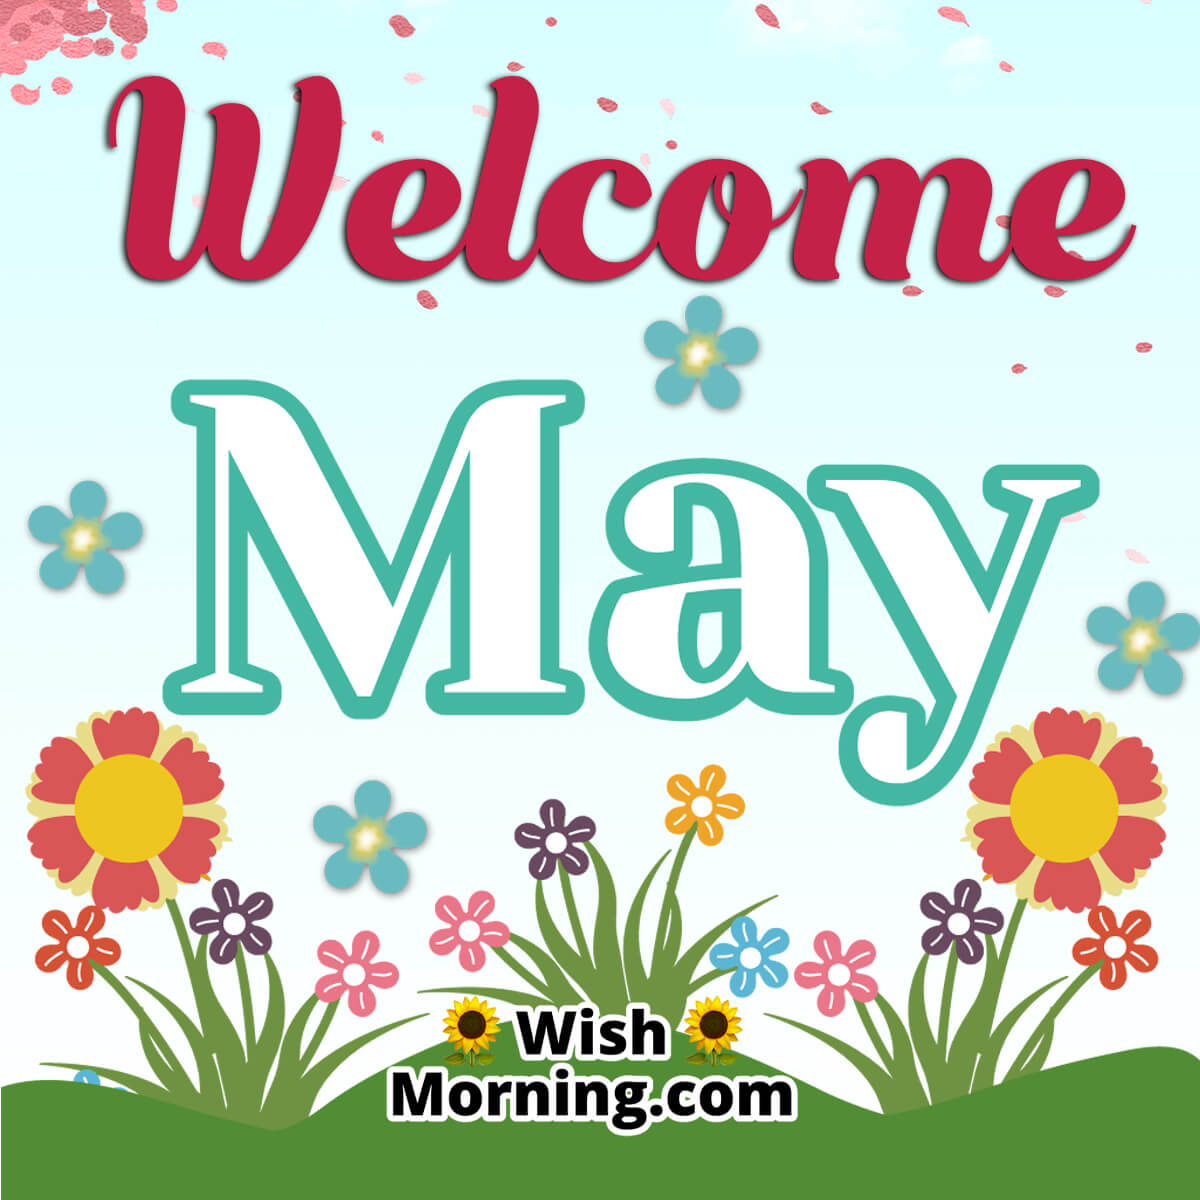 Welcome May